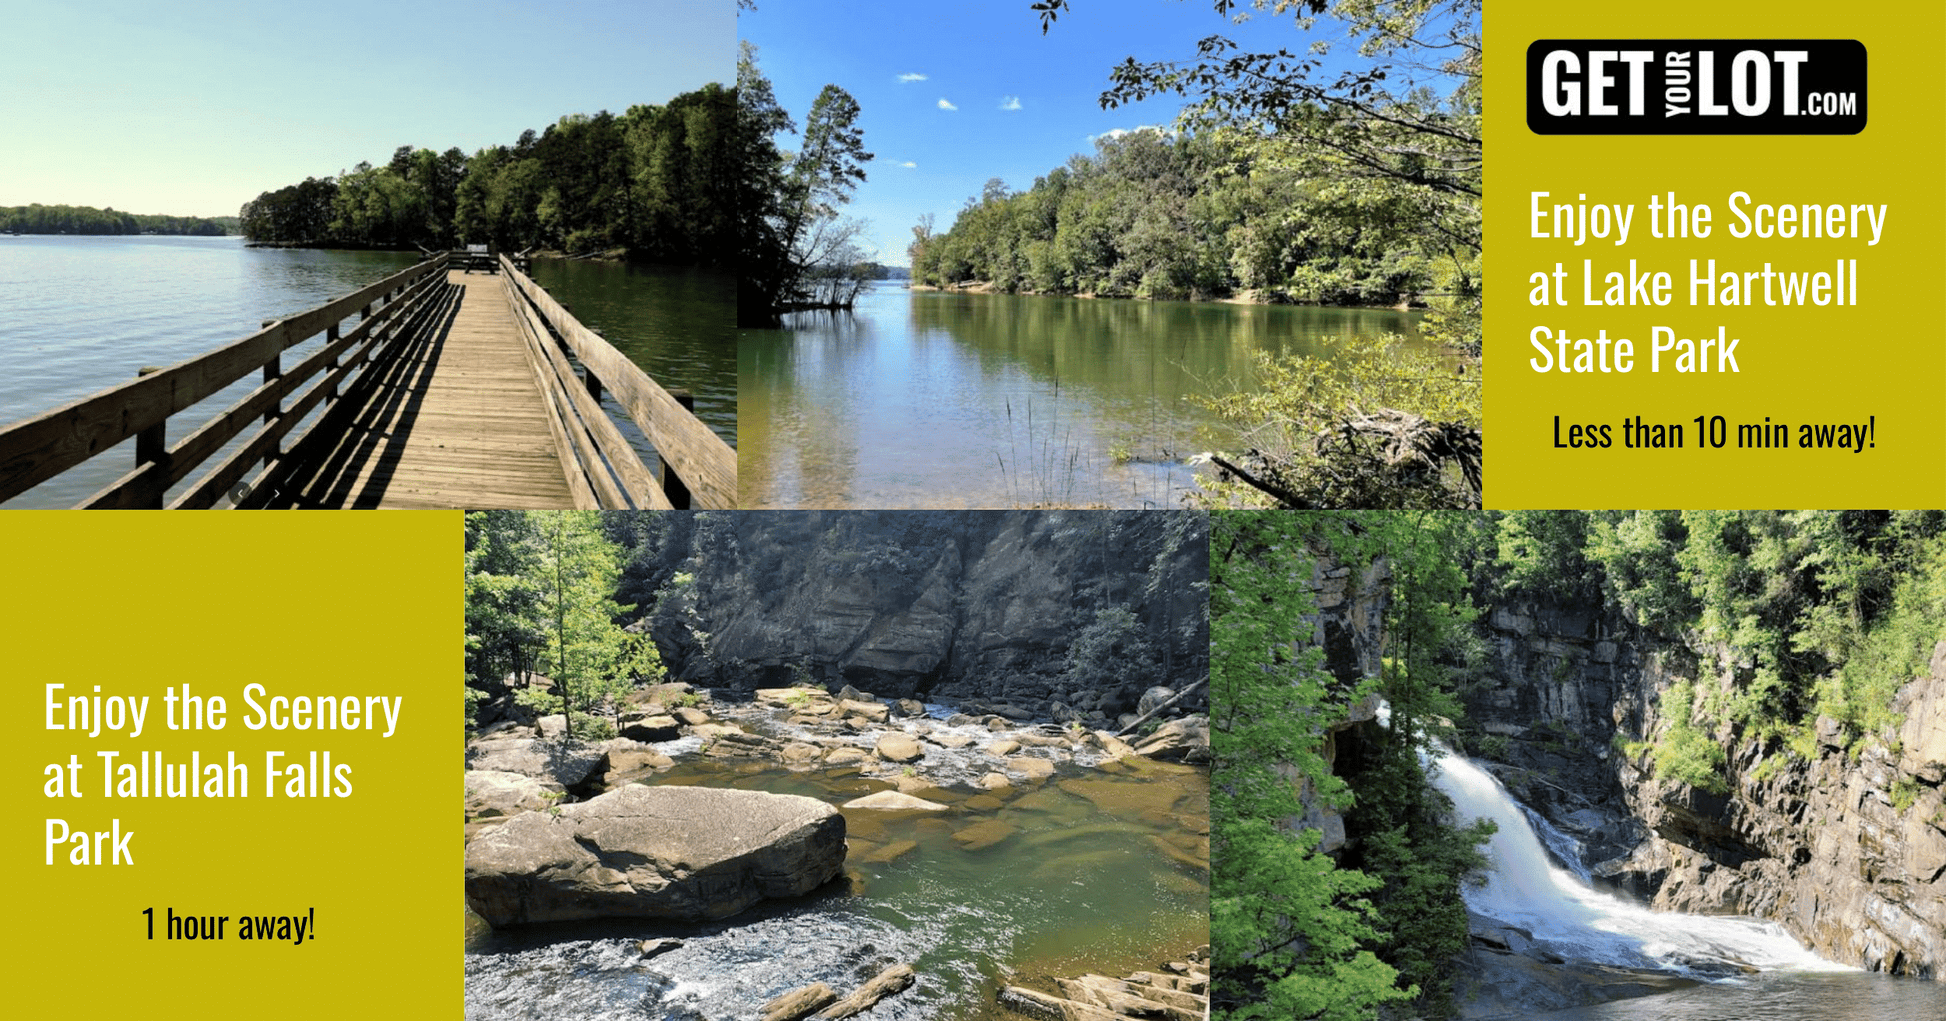 Enjoy the Scenery at Lake Hartwell State Park and Tallulah Falls Park